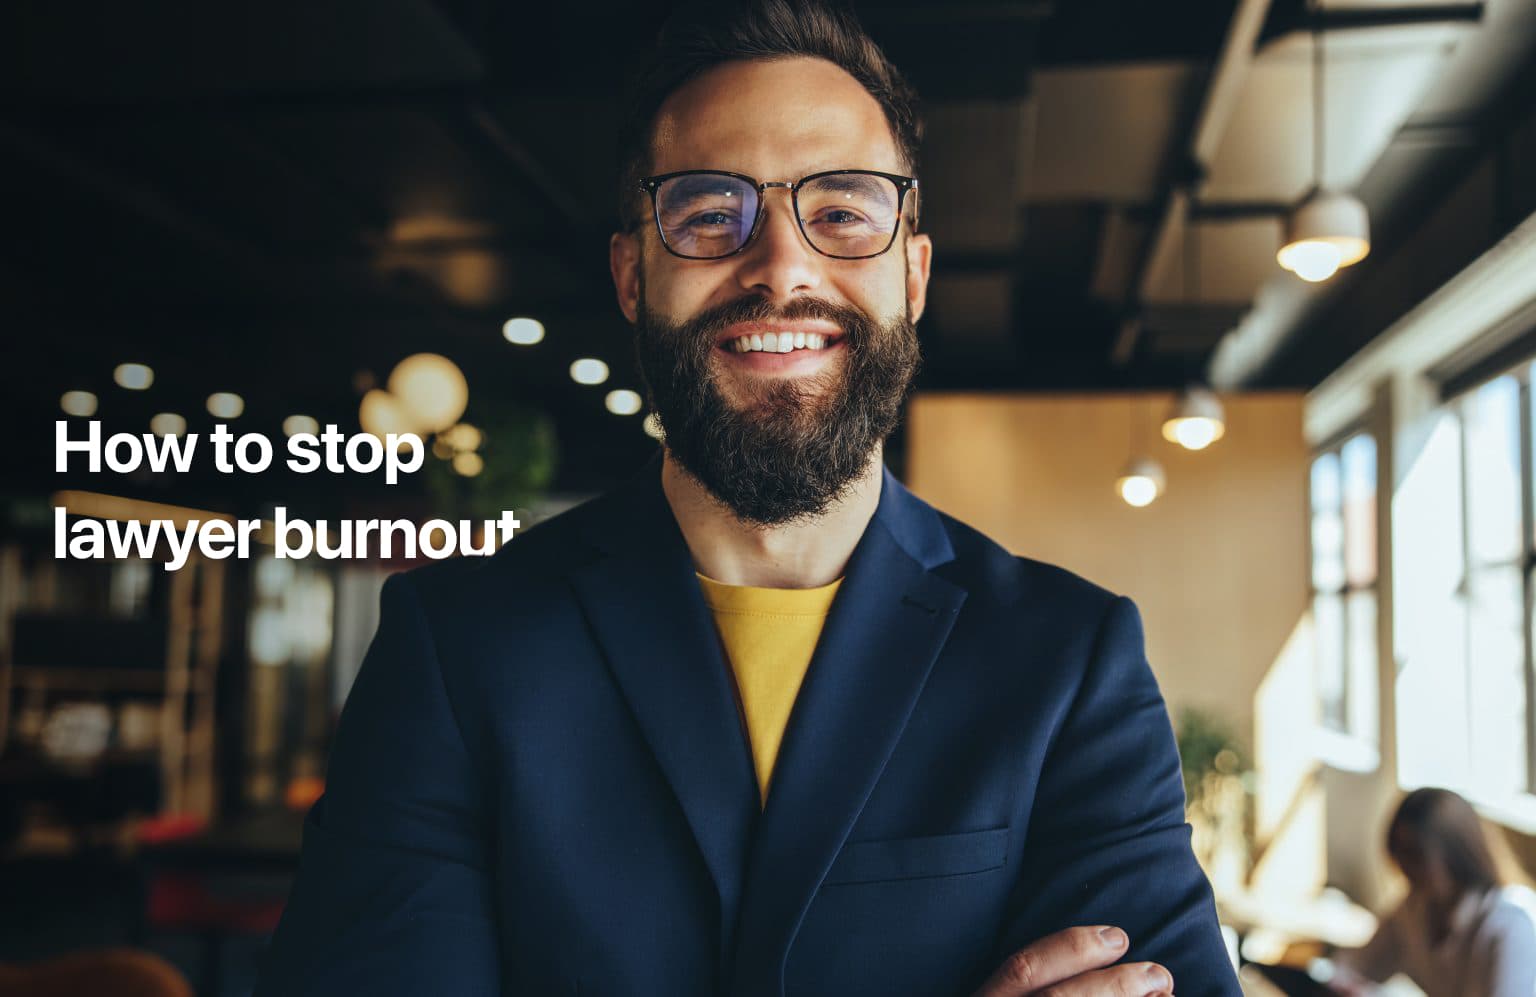 How to stop lawyer burnout